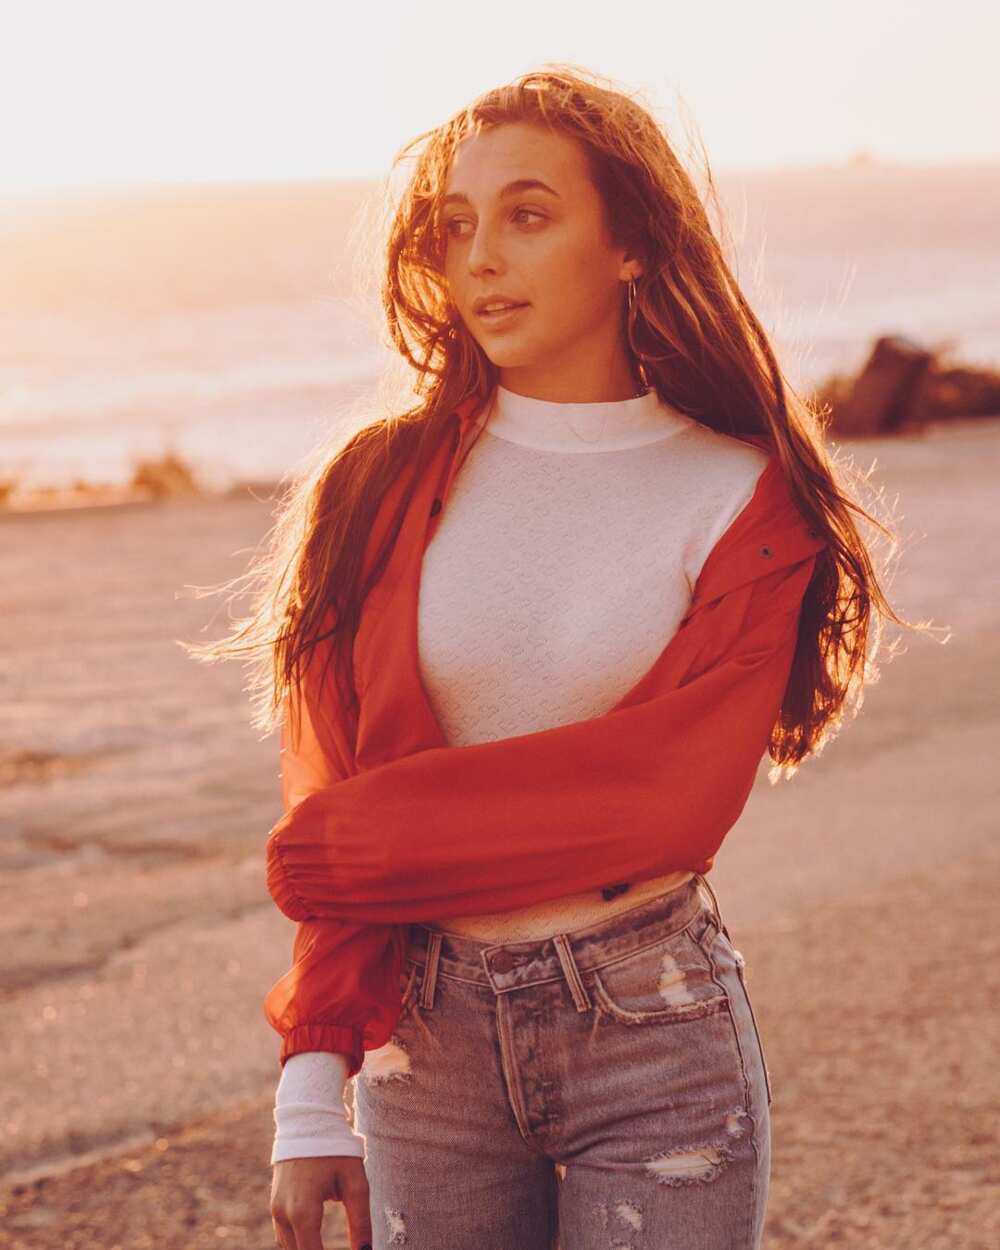 Emma Chamberlain:  Star's Life, Rise to Fame, and Net Worth